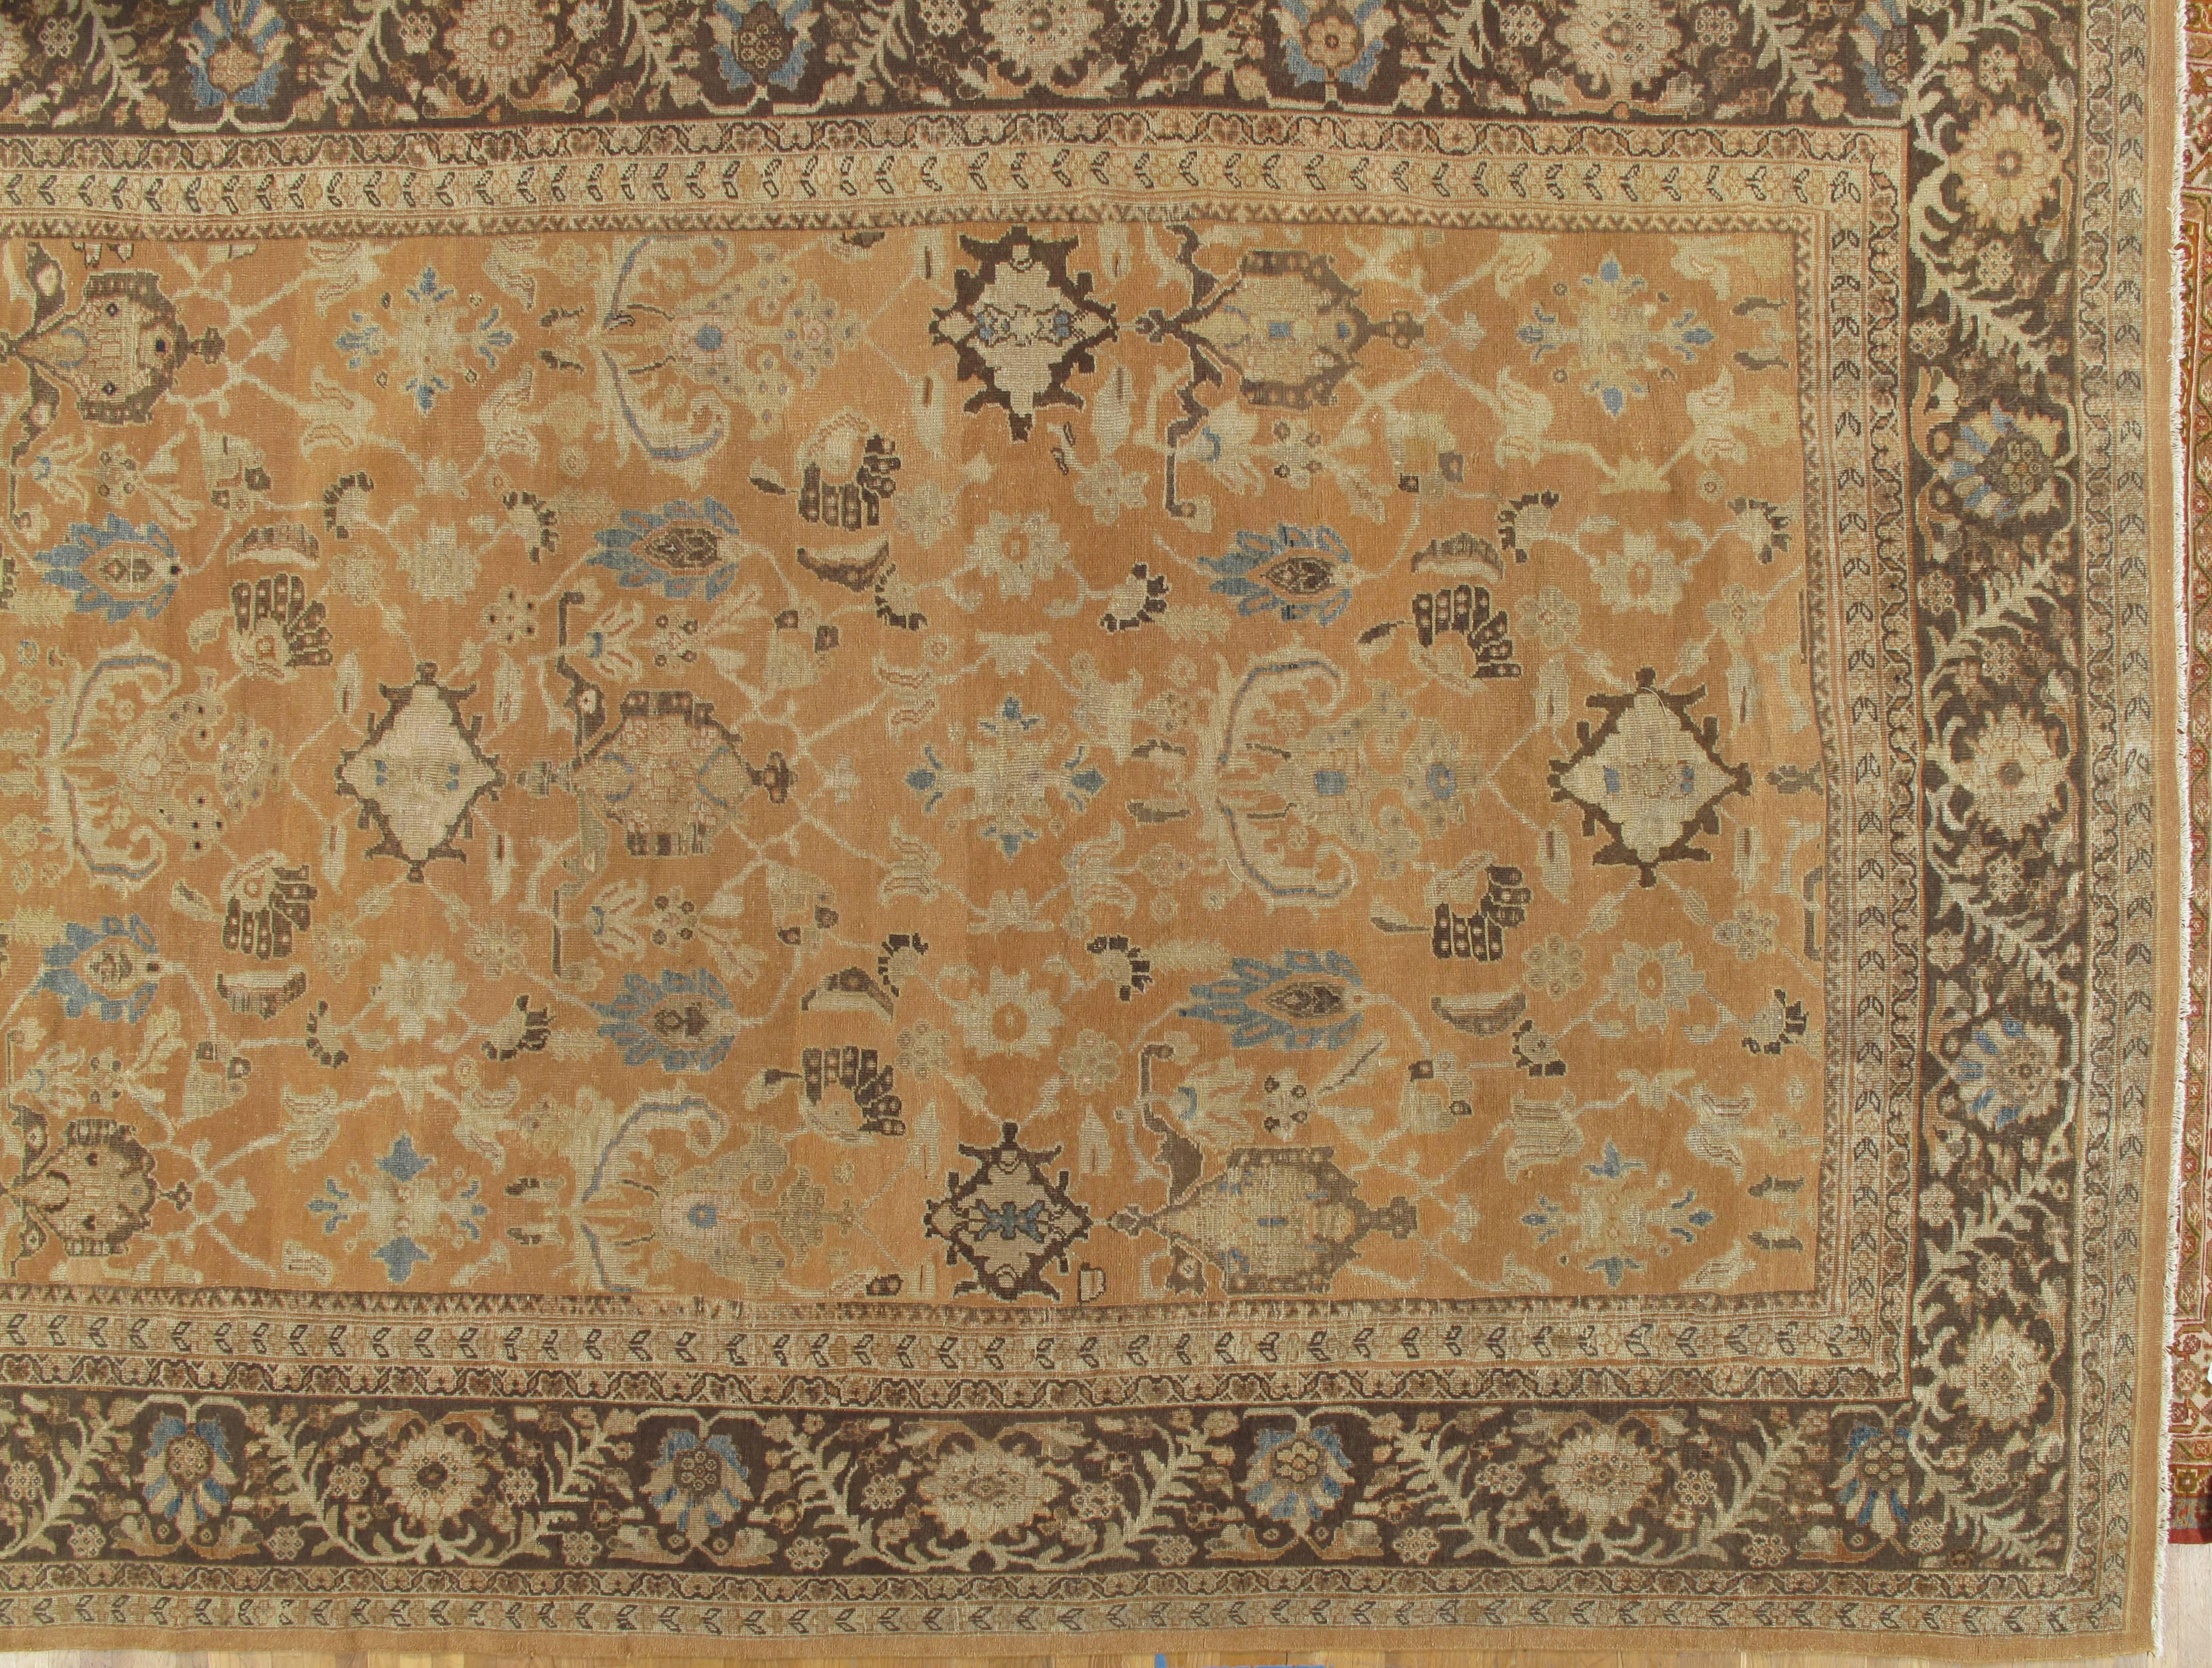 In 1883, Ziegler and Co., of Manchester, England, established a Persian carpet manufacture in Sultanabad, Iran, employing designers from major Western department stores, like B. Altman and Liberty of London, to modify fanciful 16th-17th century